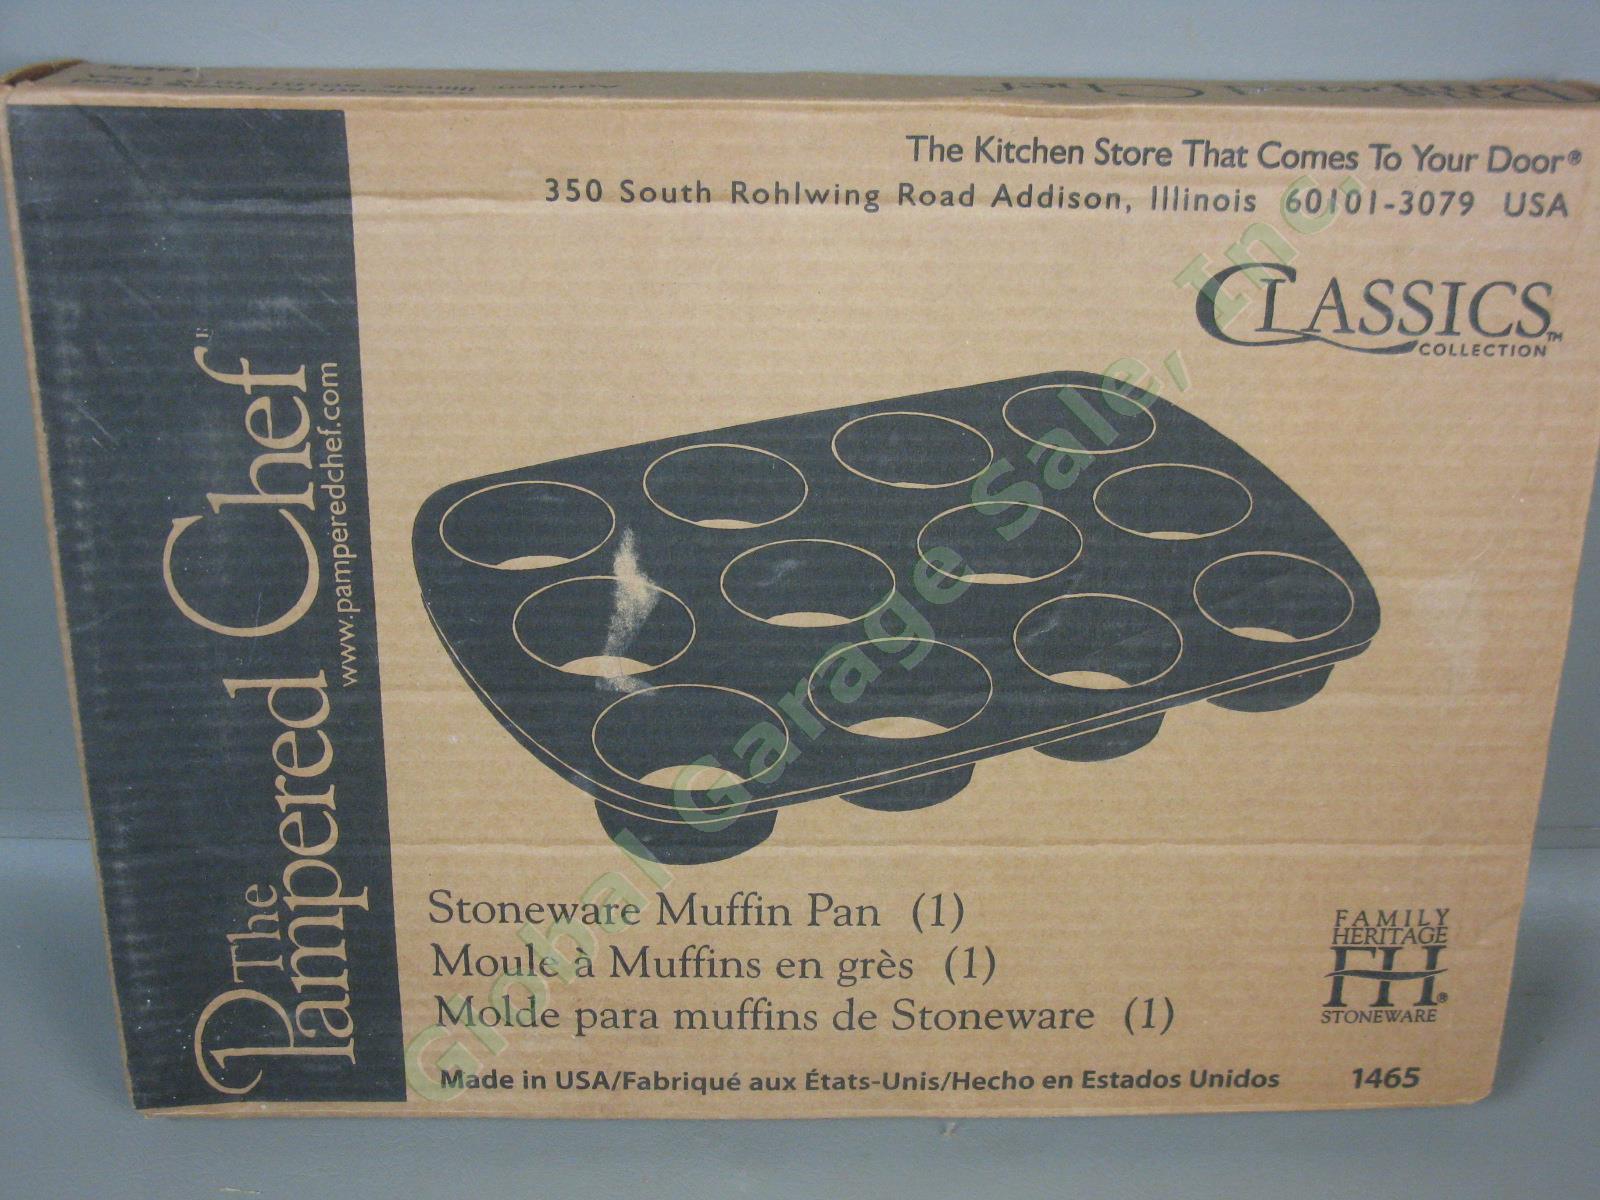 NIB! The Pampered Chef Family Heritage Stoneware 12-Muffin Pan #1465 11"x15" NR! 4